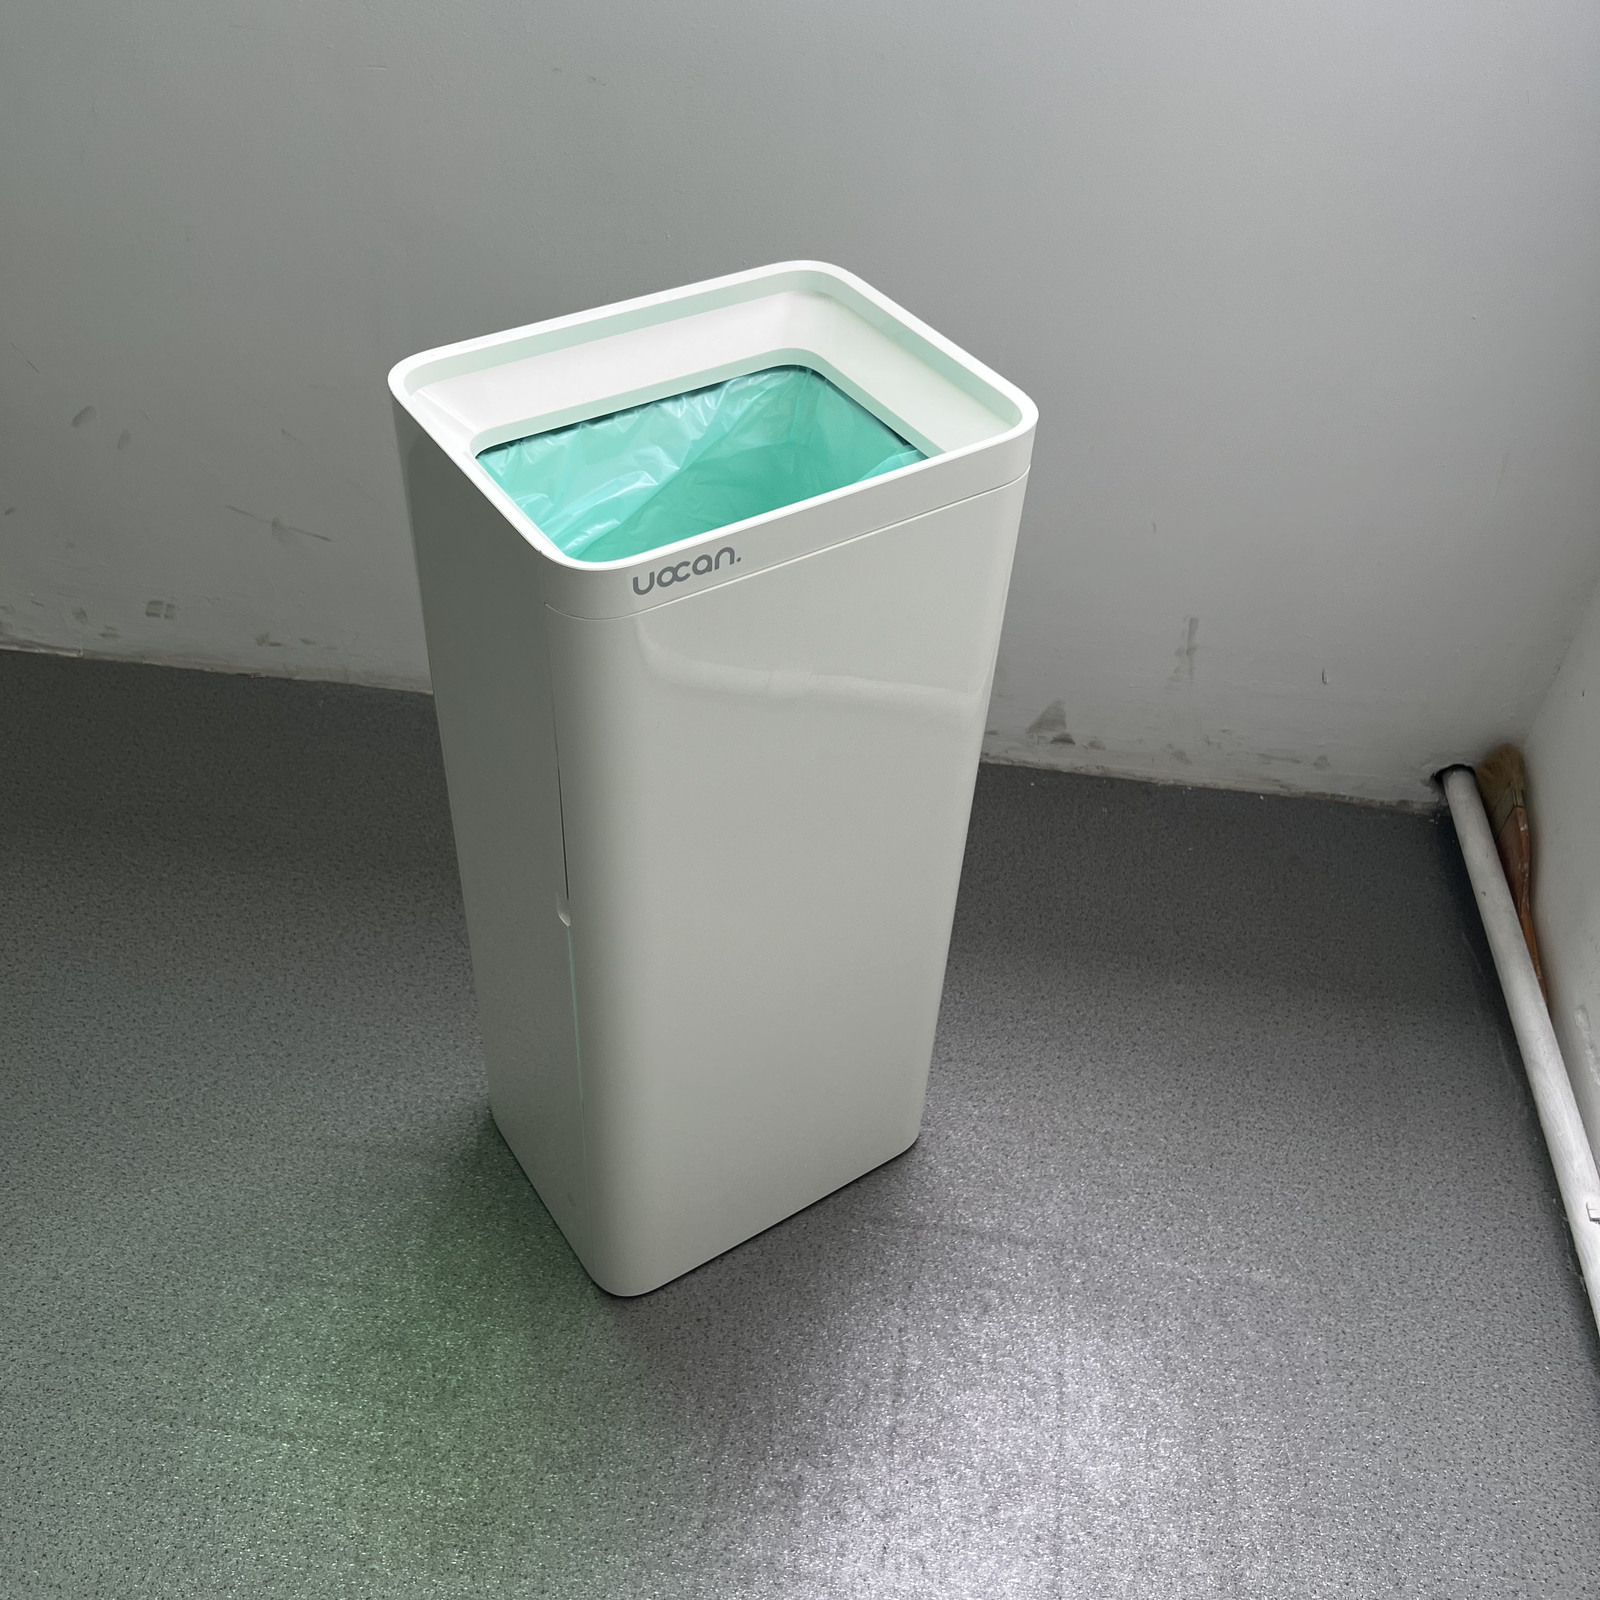 Primary image for uocan. Trash containers for household use Used for offices and work areas